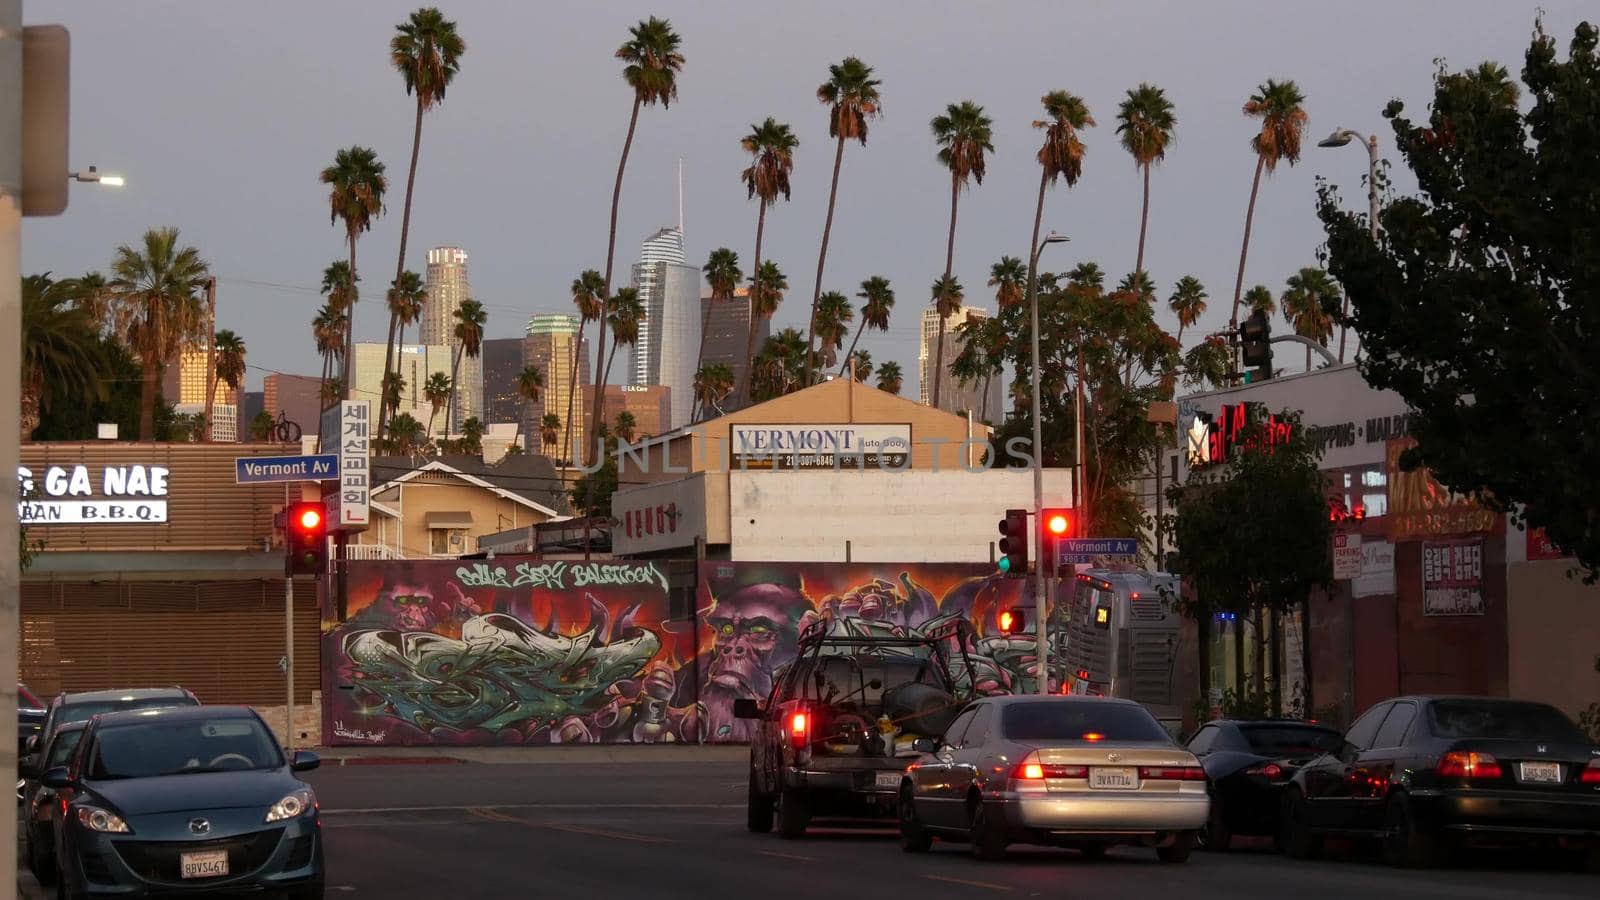 LOS ANGELES, CALIFORNIA, USA - 30 OCT 2019: Urban skyline and palms. LA city night aesthetic, graffiti painting on Vermont street. Highrise skyscrapers in downtown of metropolis. Road intersection by DogoraSun